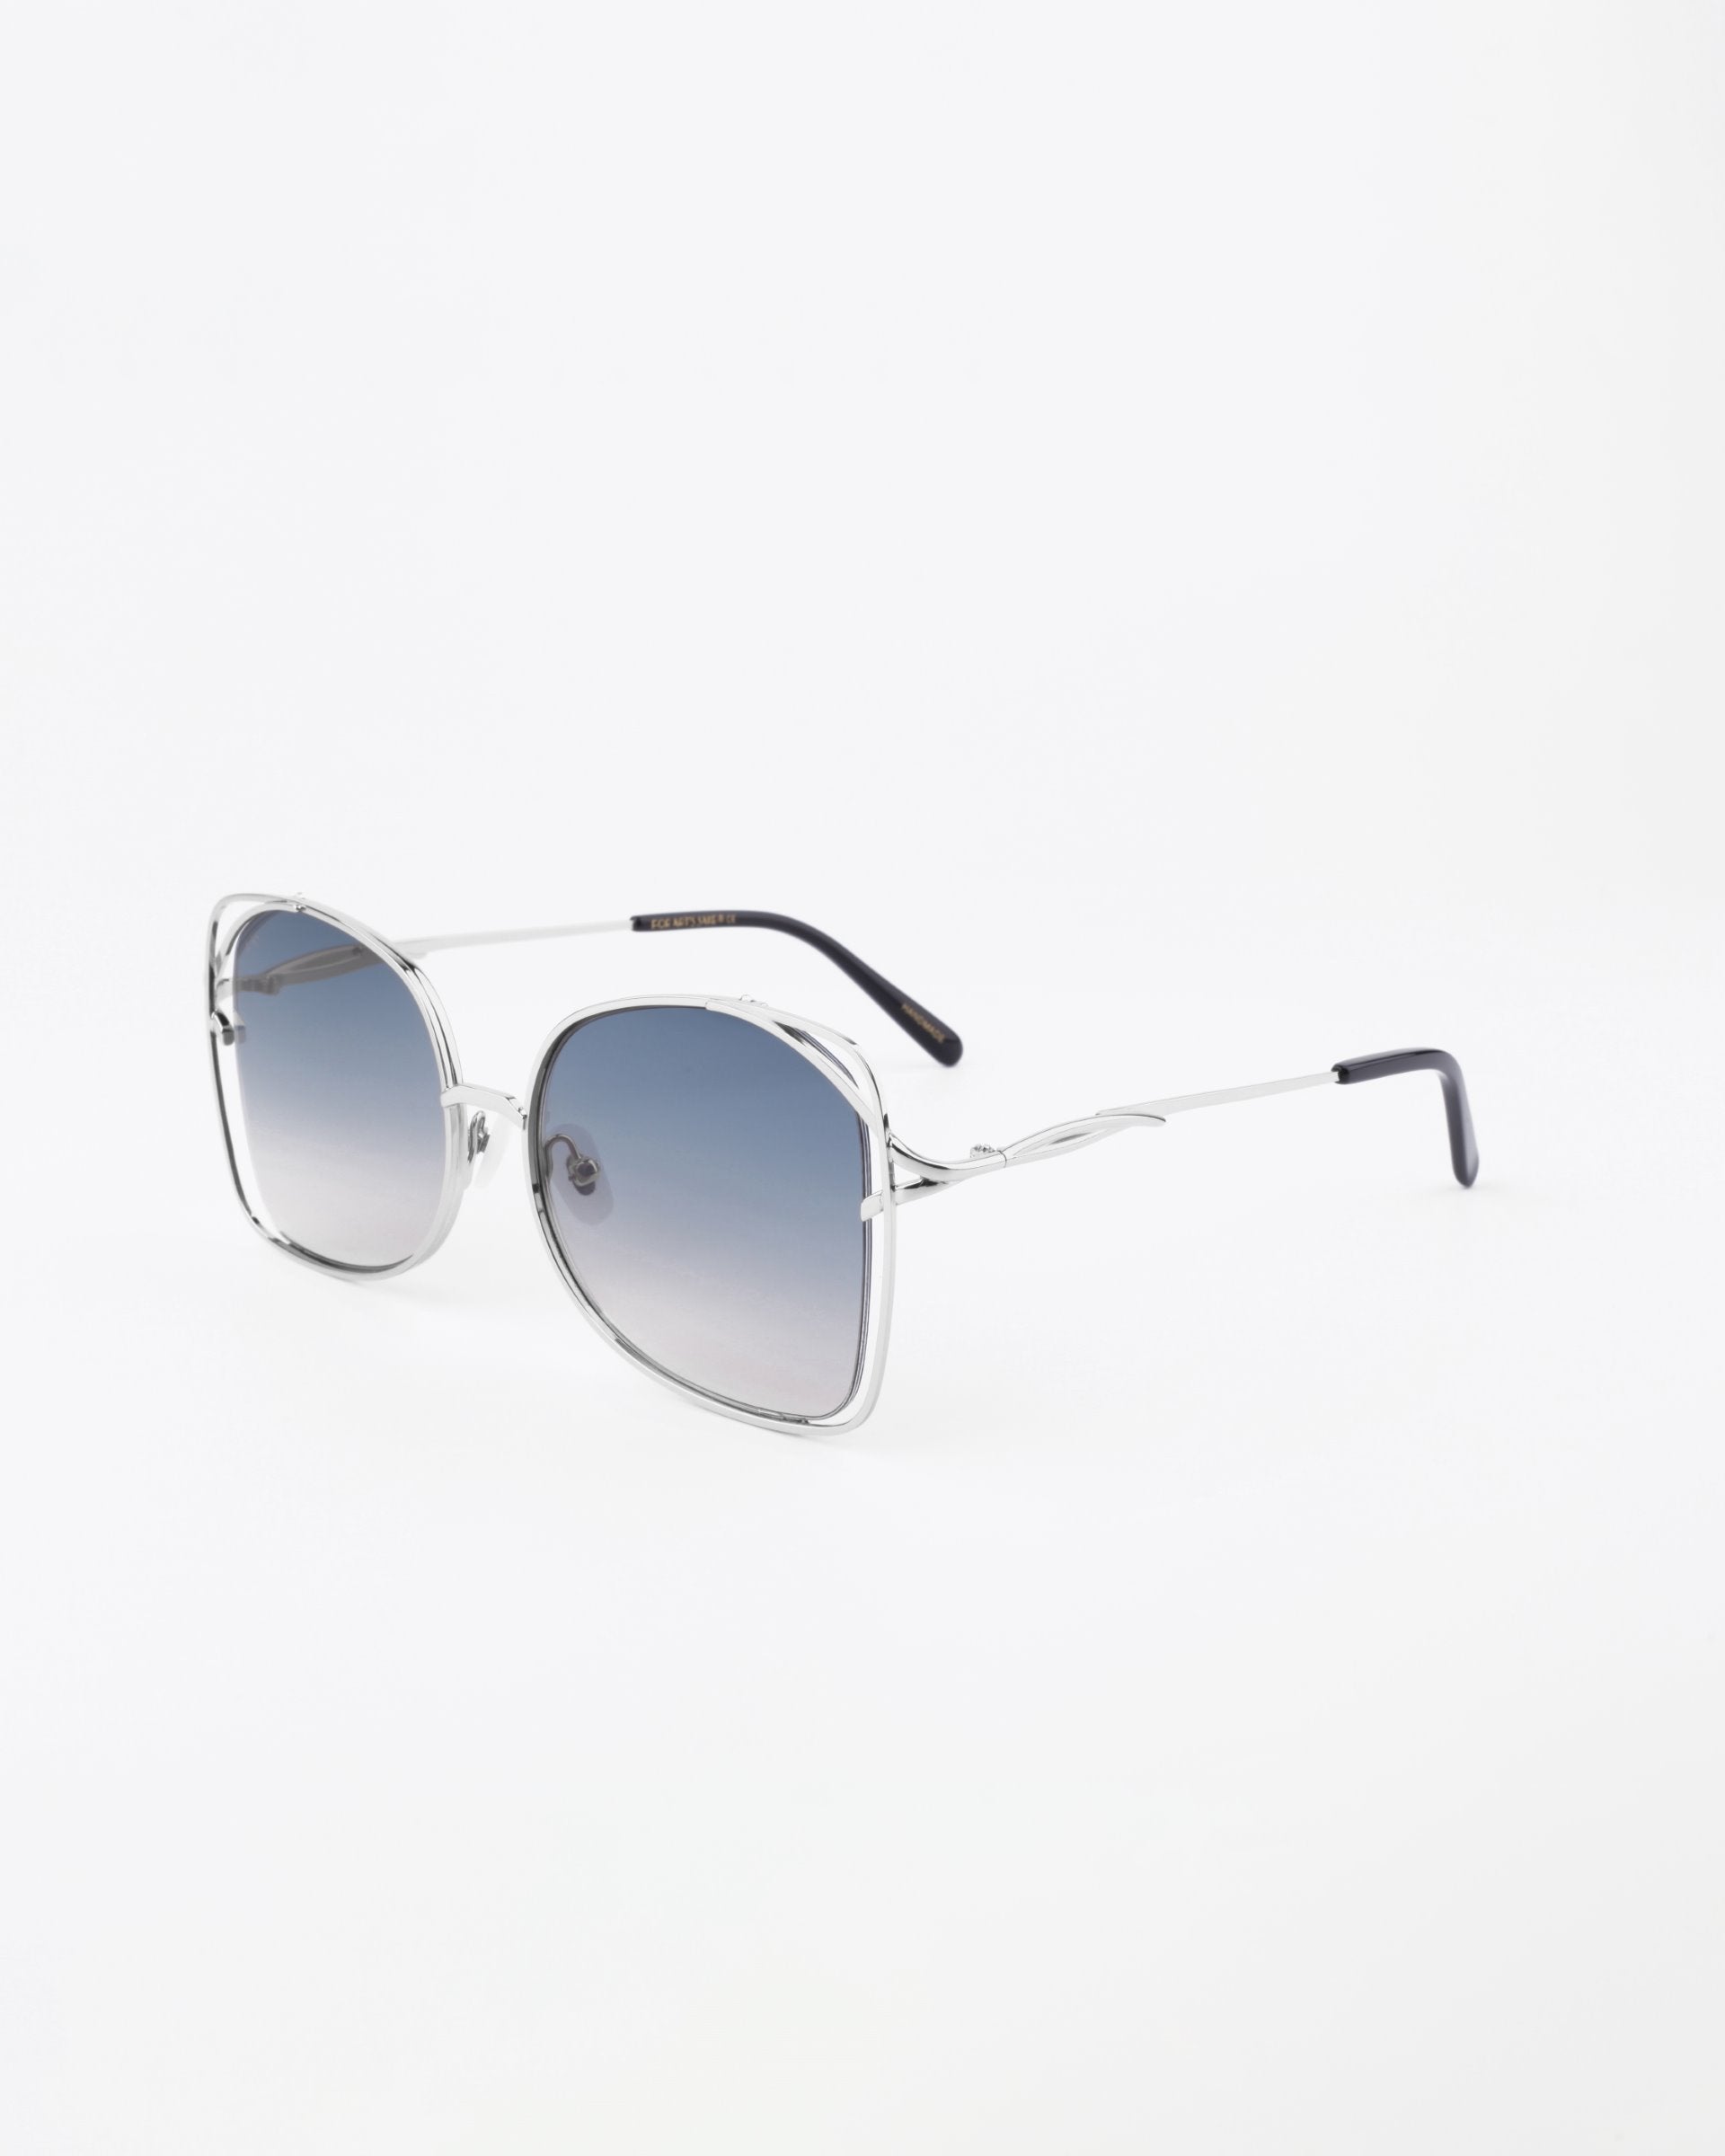 A pair of stylish handmade sunglasses, Carousel by For Art's Sake®, with shatter-resistant, large rounded square blue gradient lenses and thin temples that extend into black tips. The silver metal frame adds a sophisticated touch against the plain white background.